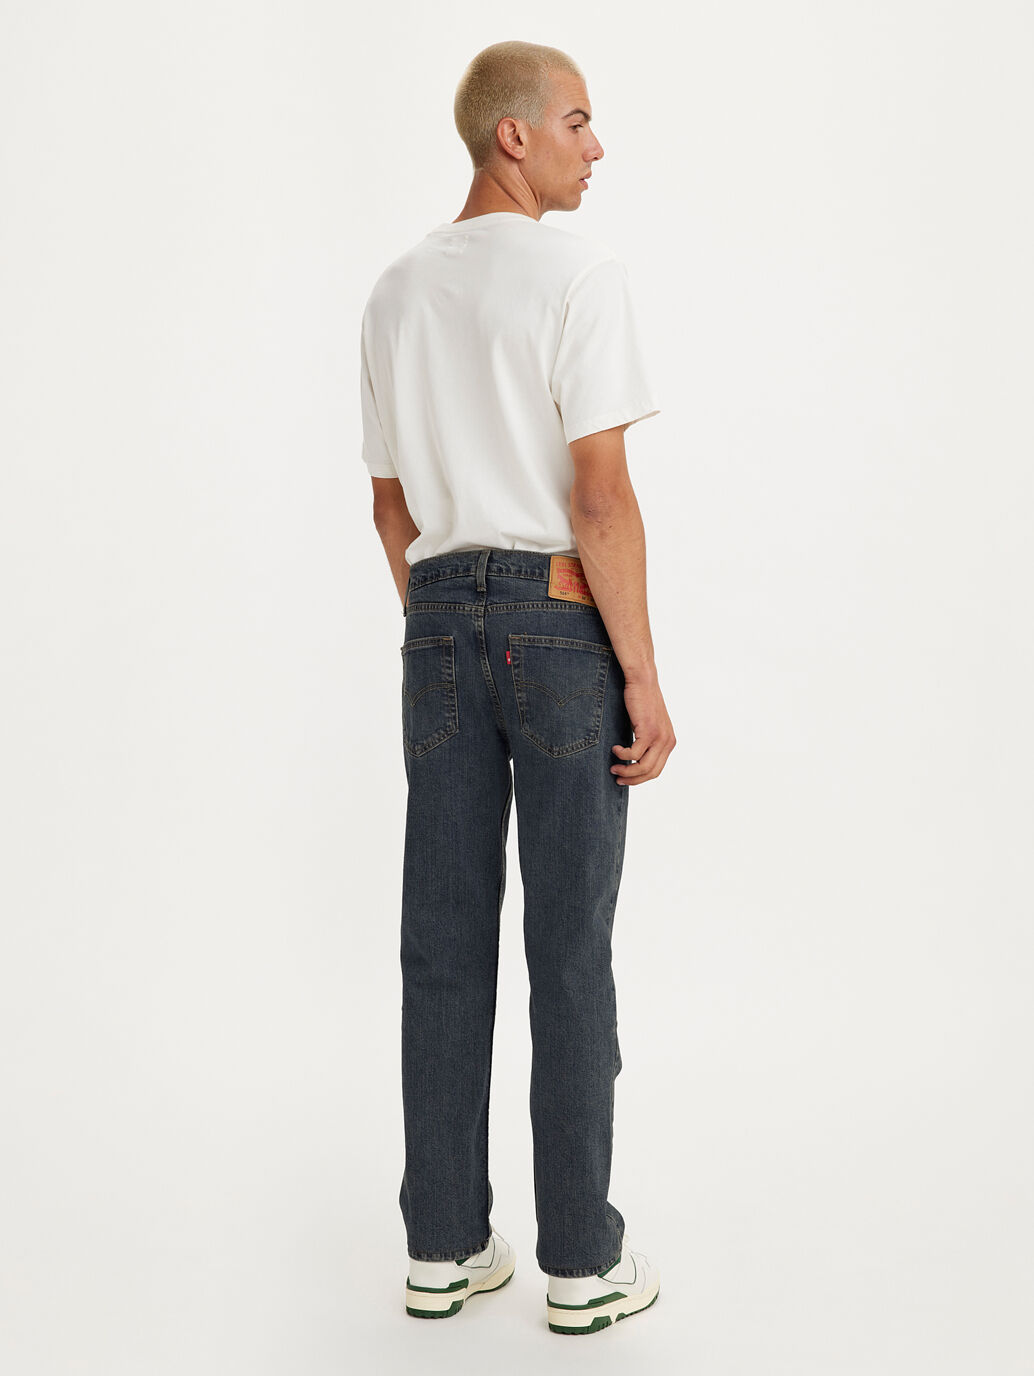 514™ Straight Fit Jeans in Corben Wash